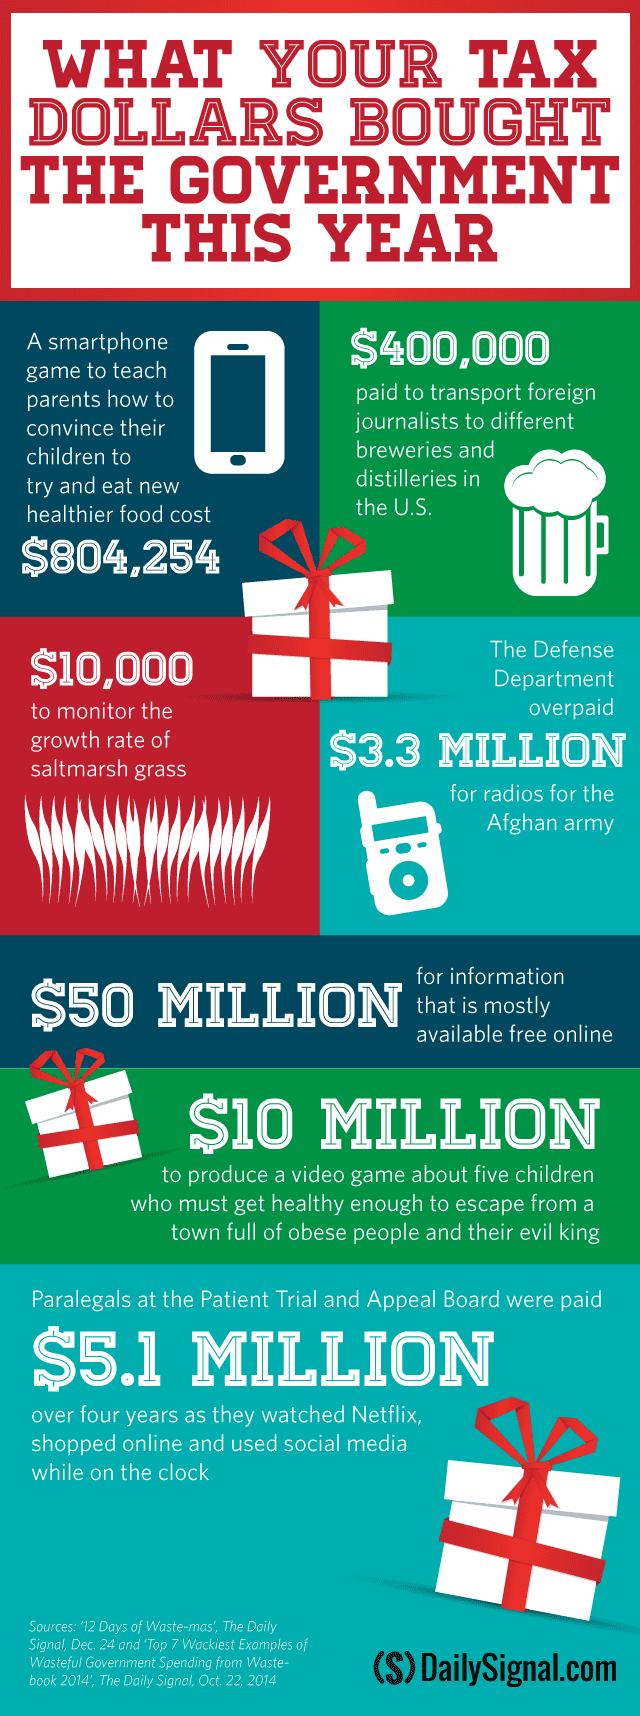 taxdollar-infographic-christmas3.png